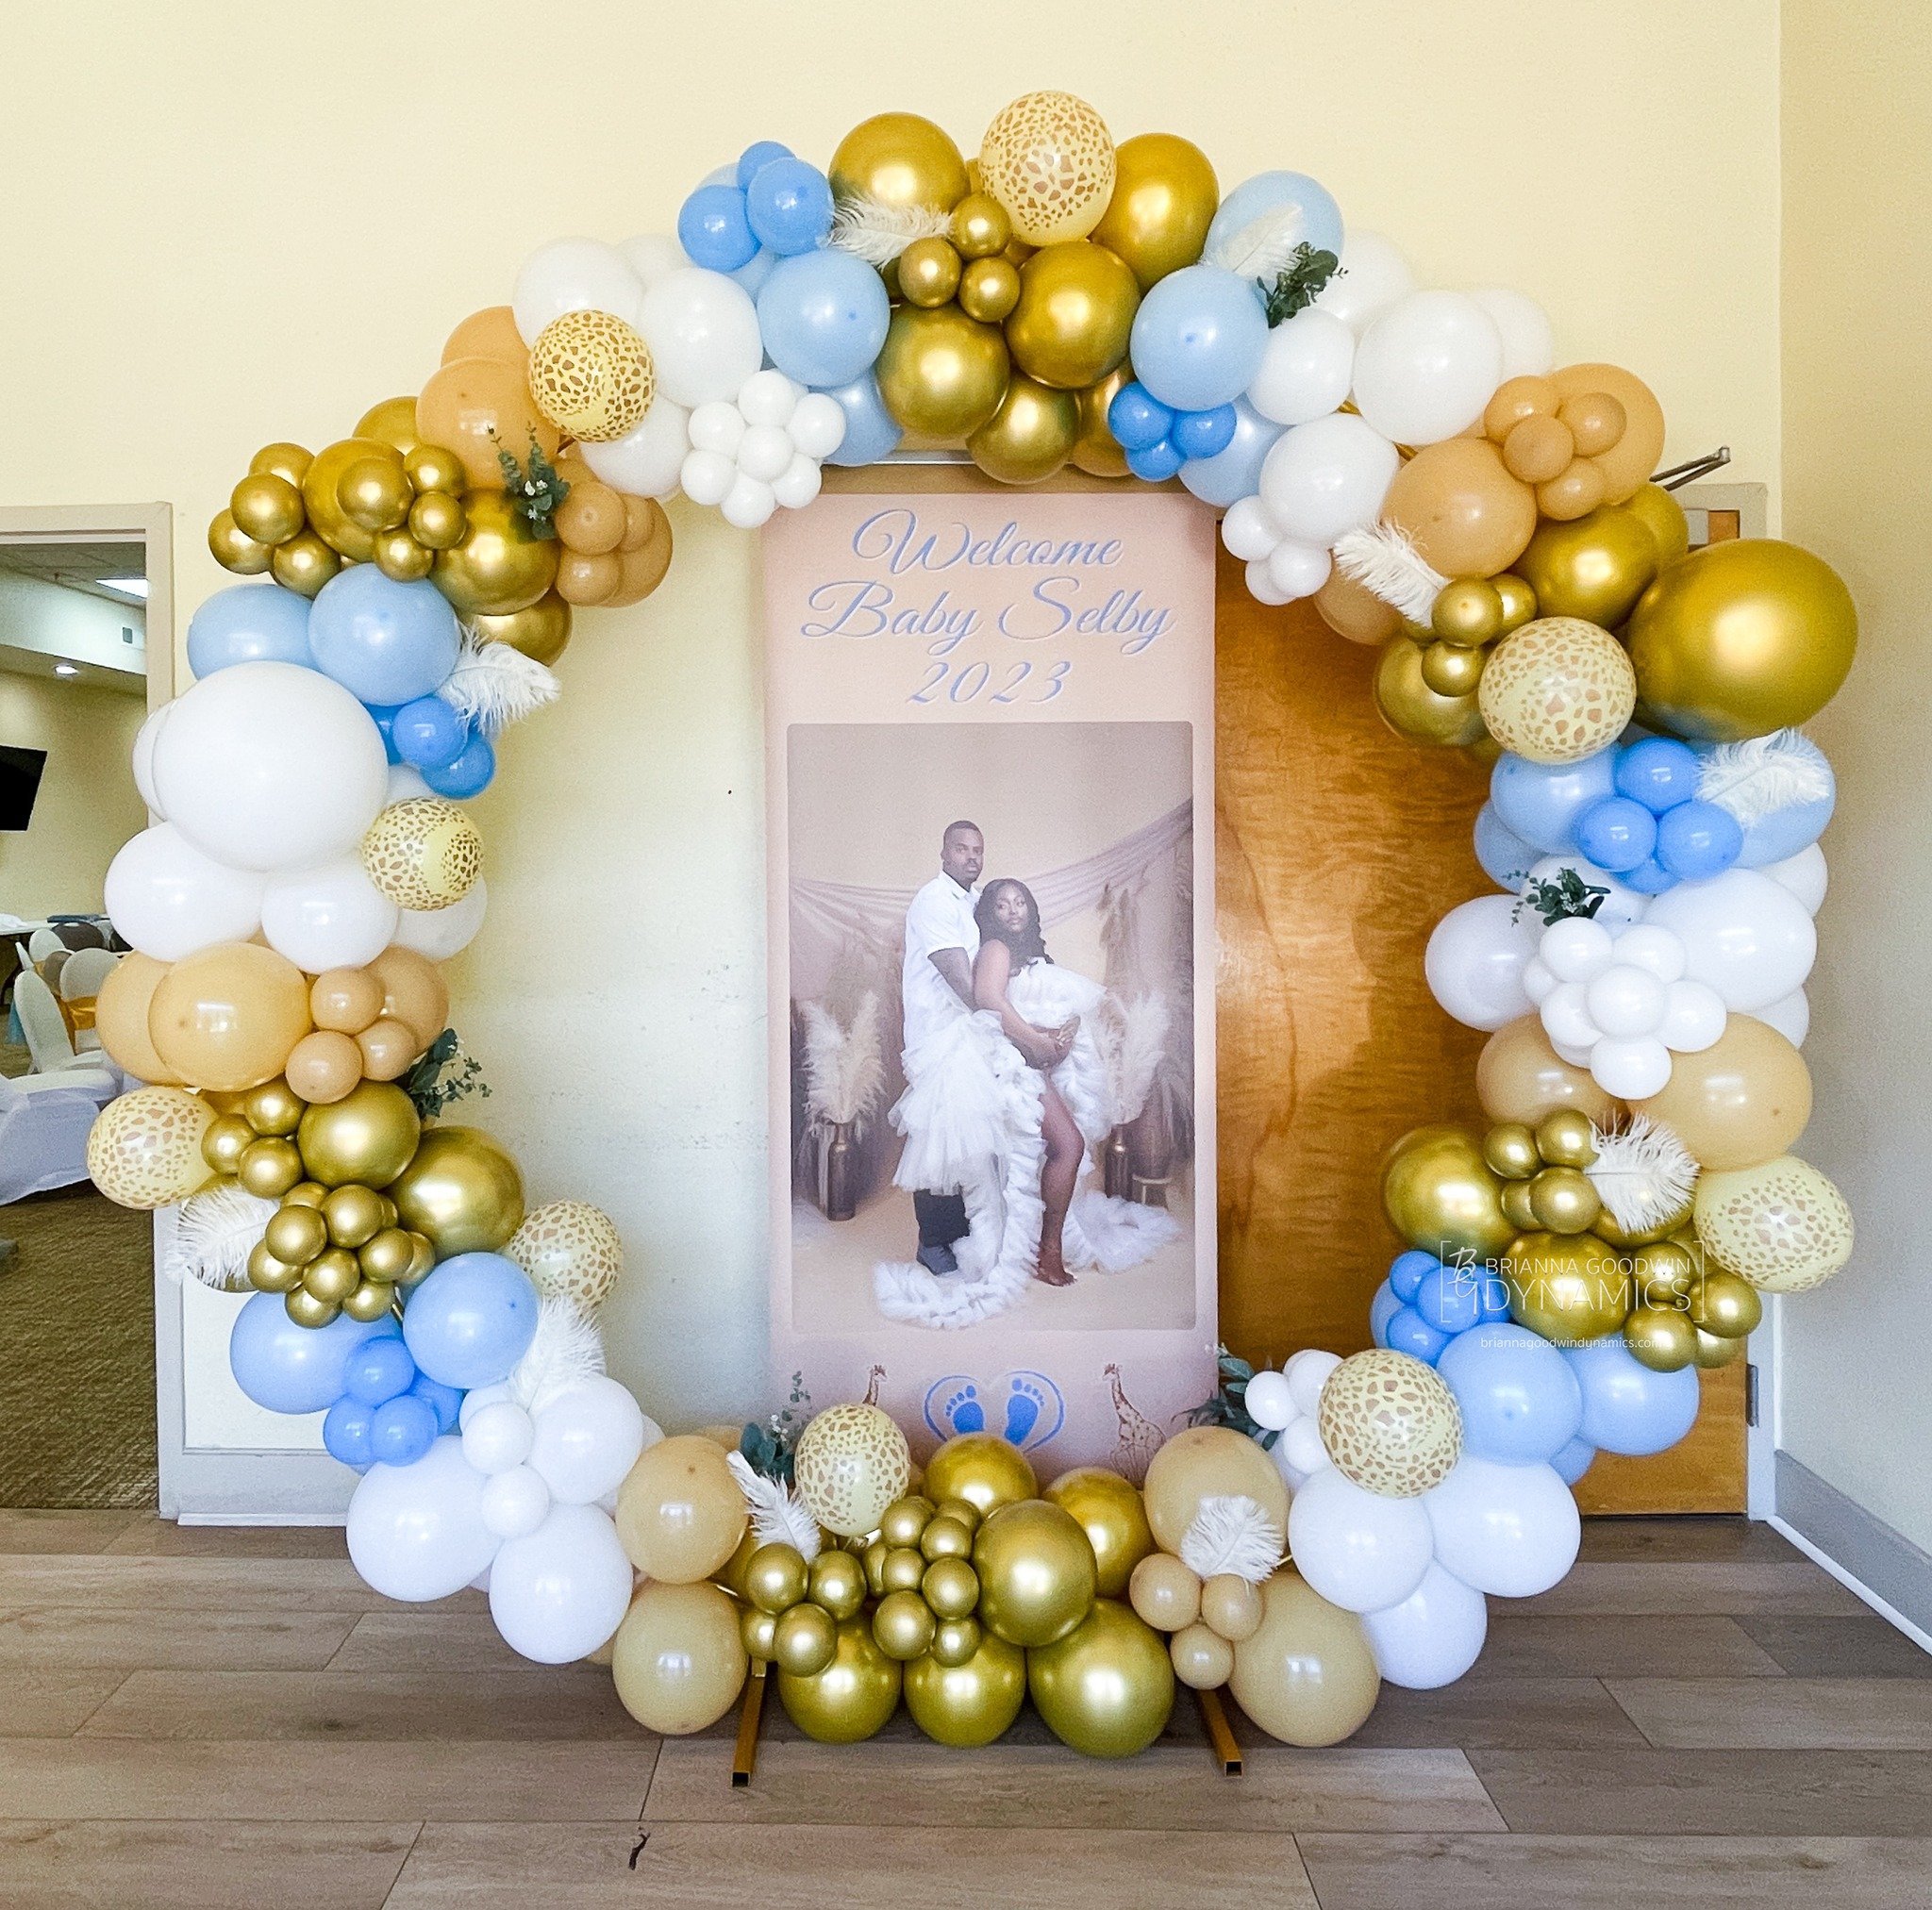 Bringing your celebrations to new heights! 🎈✨ Let our balloons transform your next event. Contact us today for custom designs! #BalloonDecor #PartyTime #CelebrationMagic 

 www.briannagoodwindynamics.com ⚡️